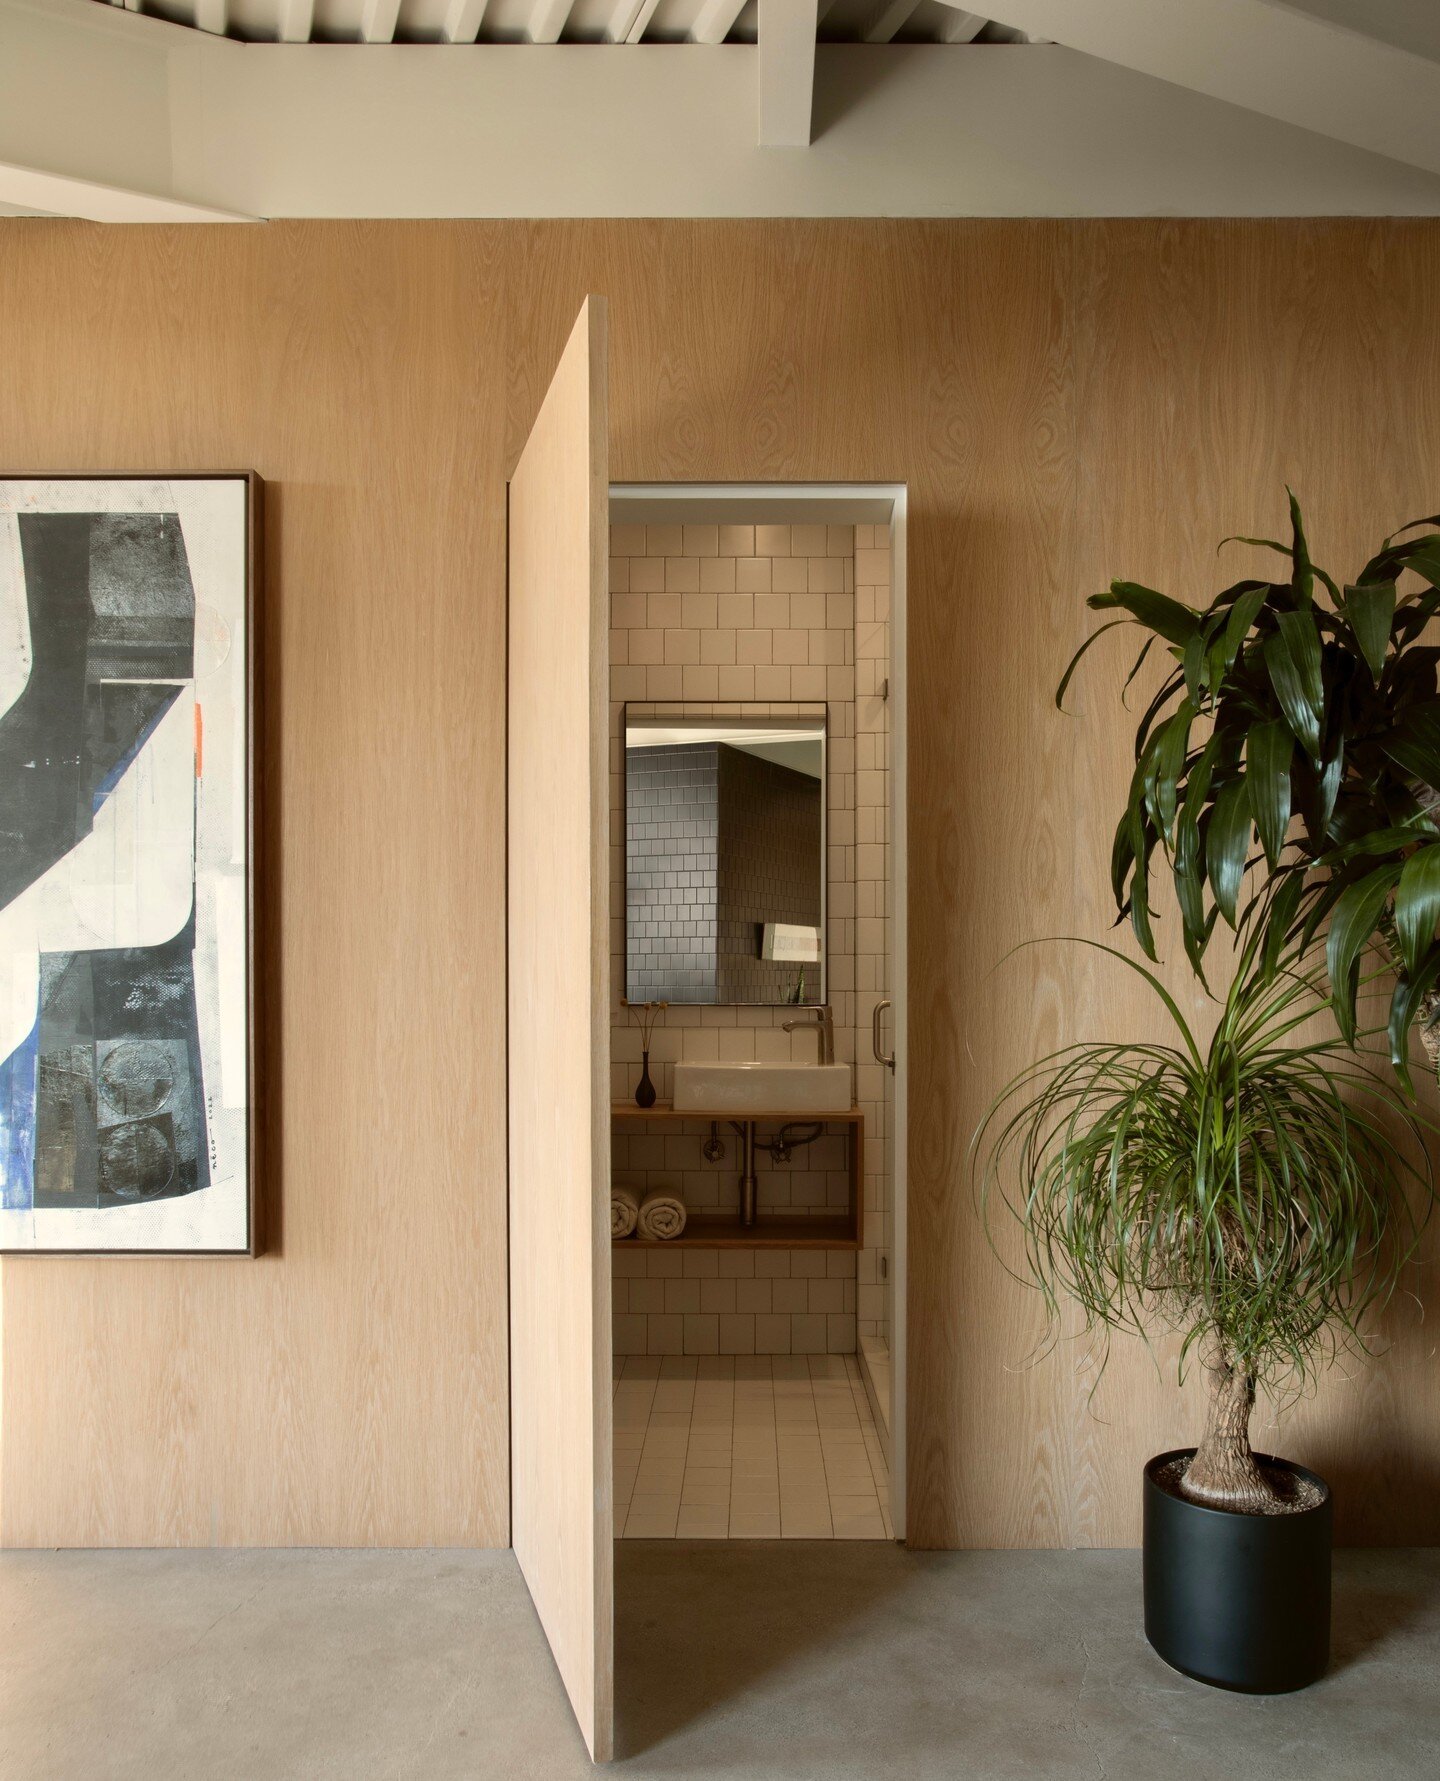 Thanks to @wallpapermag for the online feature of our Olancha project!⁠
.⁠
This tiny bathroom is hidden in the white oak wall paneling under the staircase. When the door is closed, you don't even know it is there.⁠
photo @marciaprentice⁠
#sarahrosenh